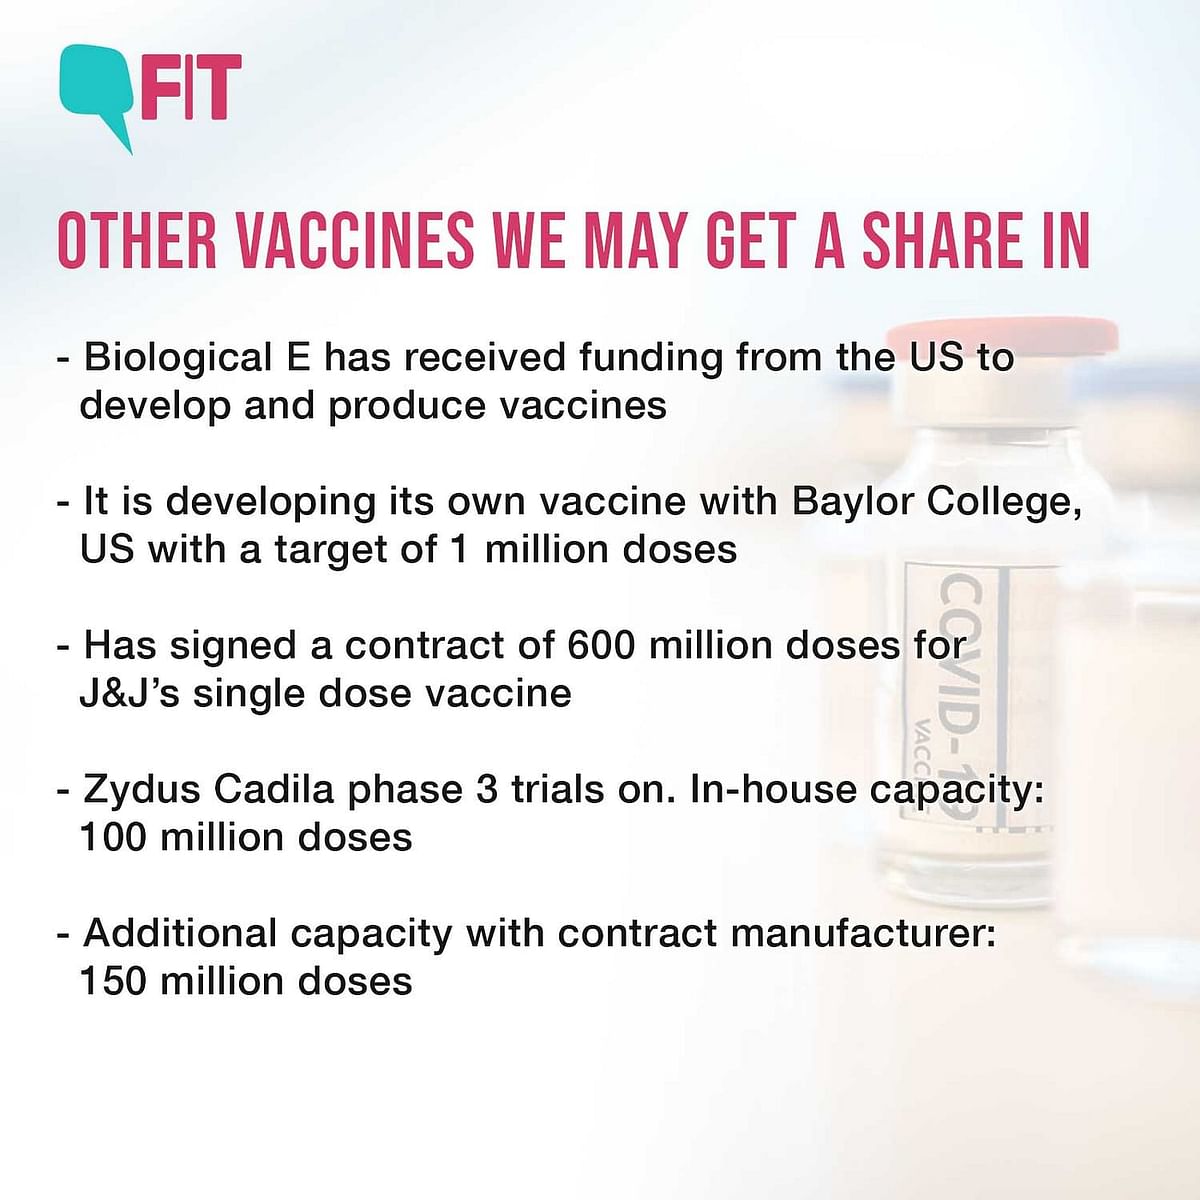 As India adds Sputnik V to its vaccine arsenal, what pool of vaccines does India have access to?